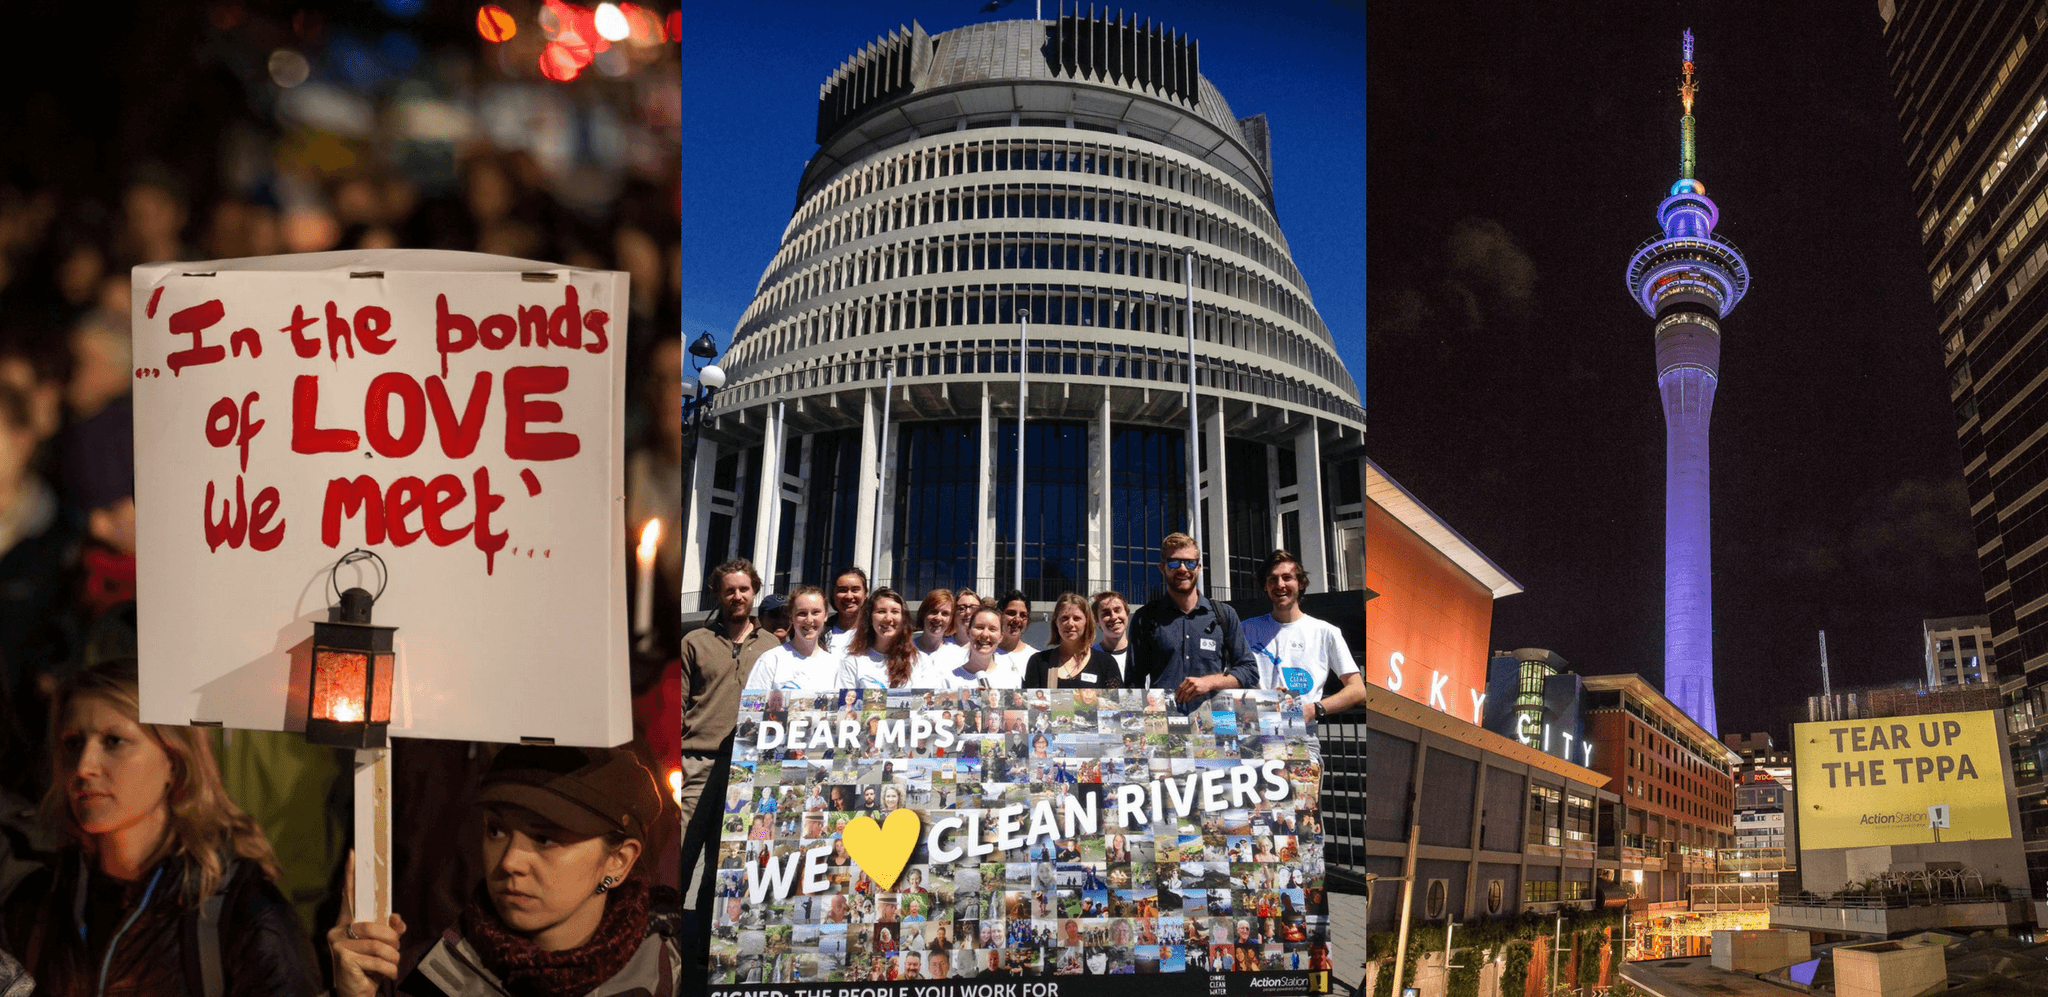 A group of people in front of the beehive with a sign asking MPs for clean rivers